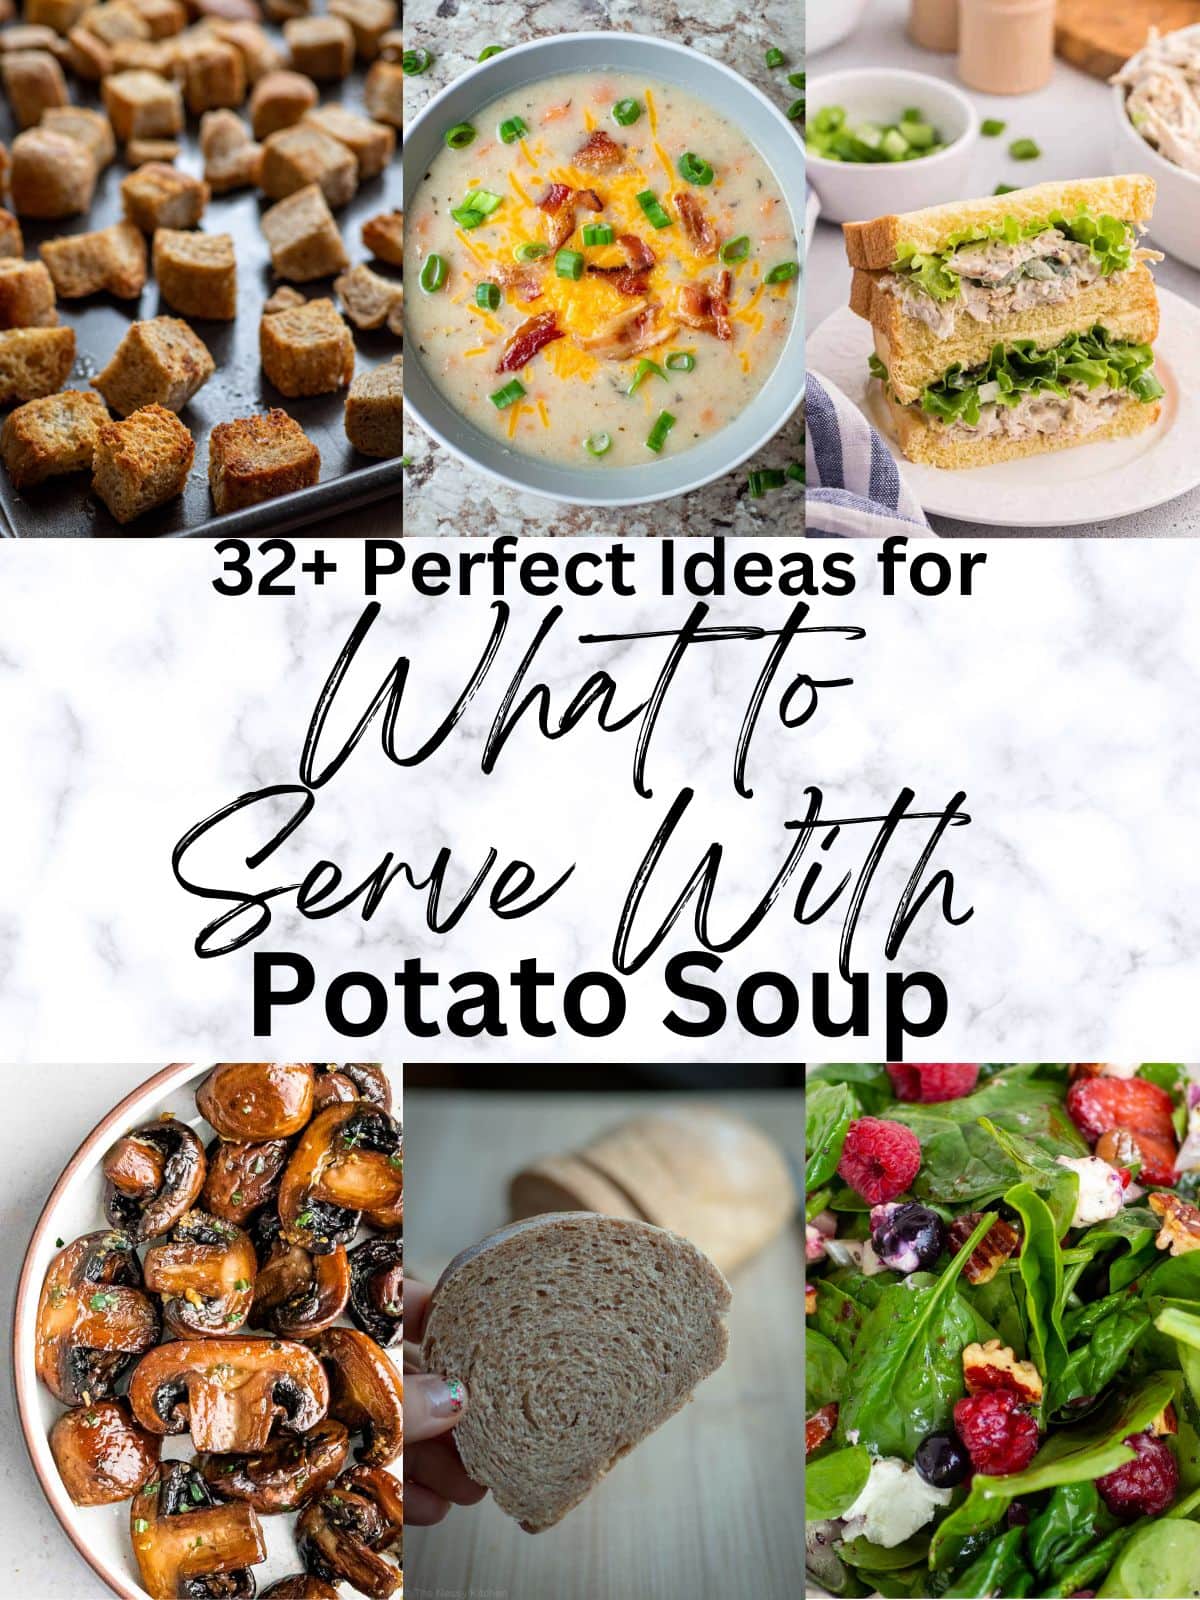 Collage of ideas to serve with potato soup including croutons, a sandwich and salad.